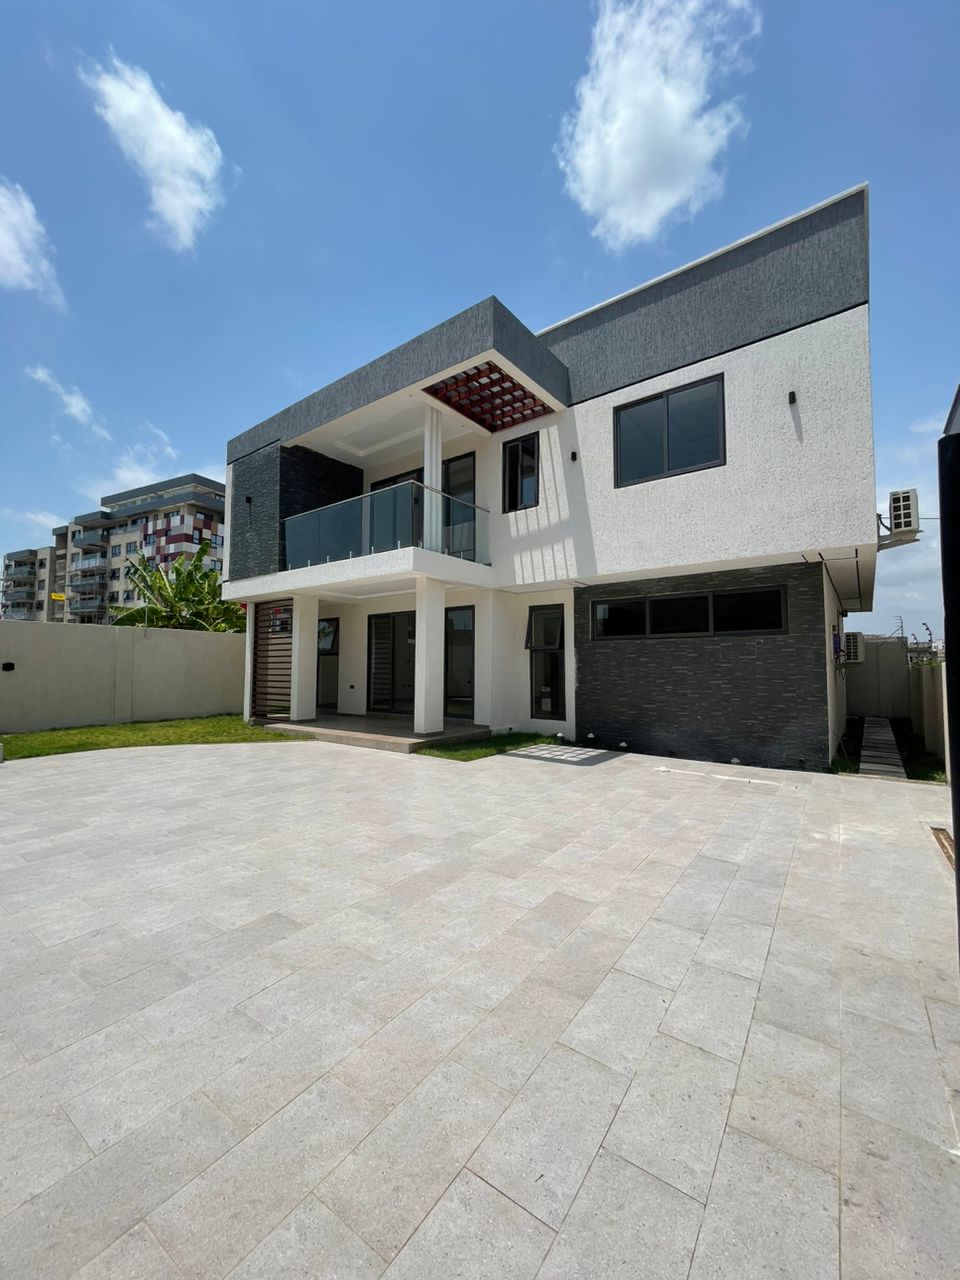 3 Bedroom Modern House For Sale at Tse Addo, Accra